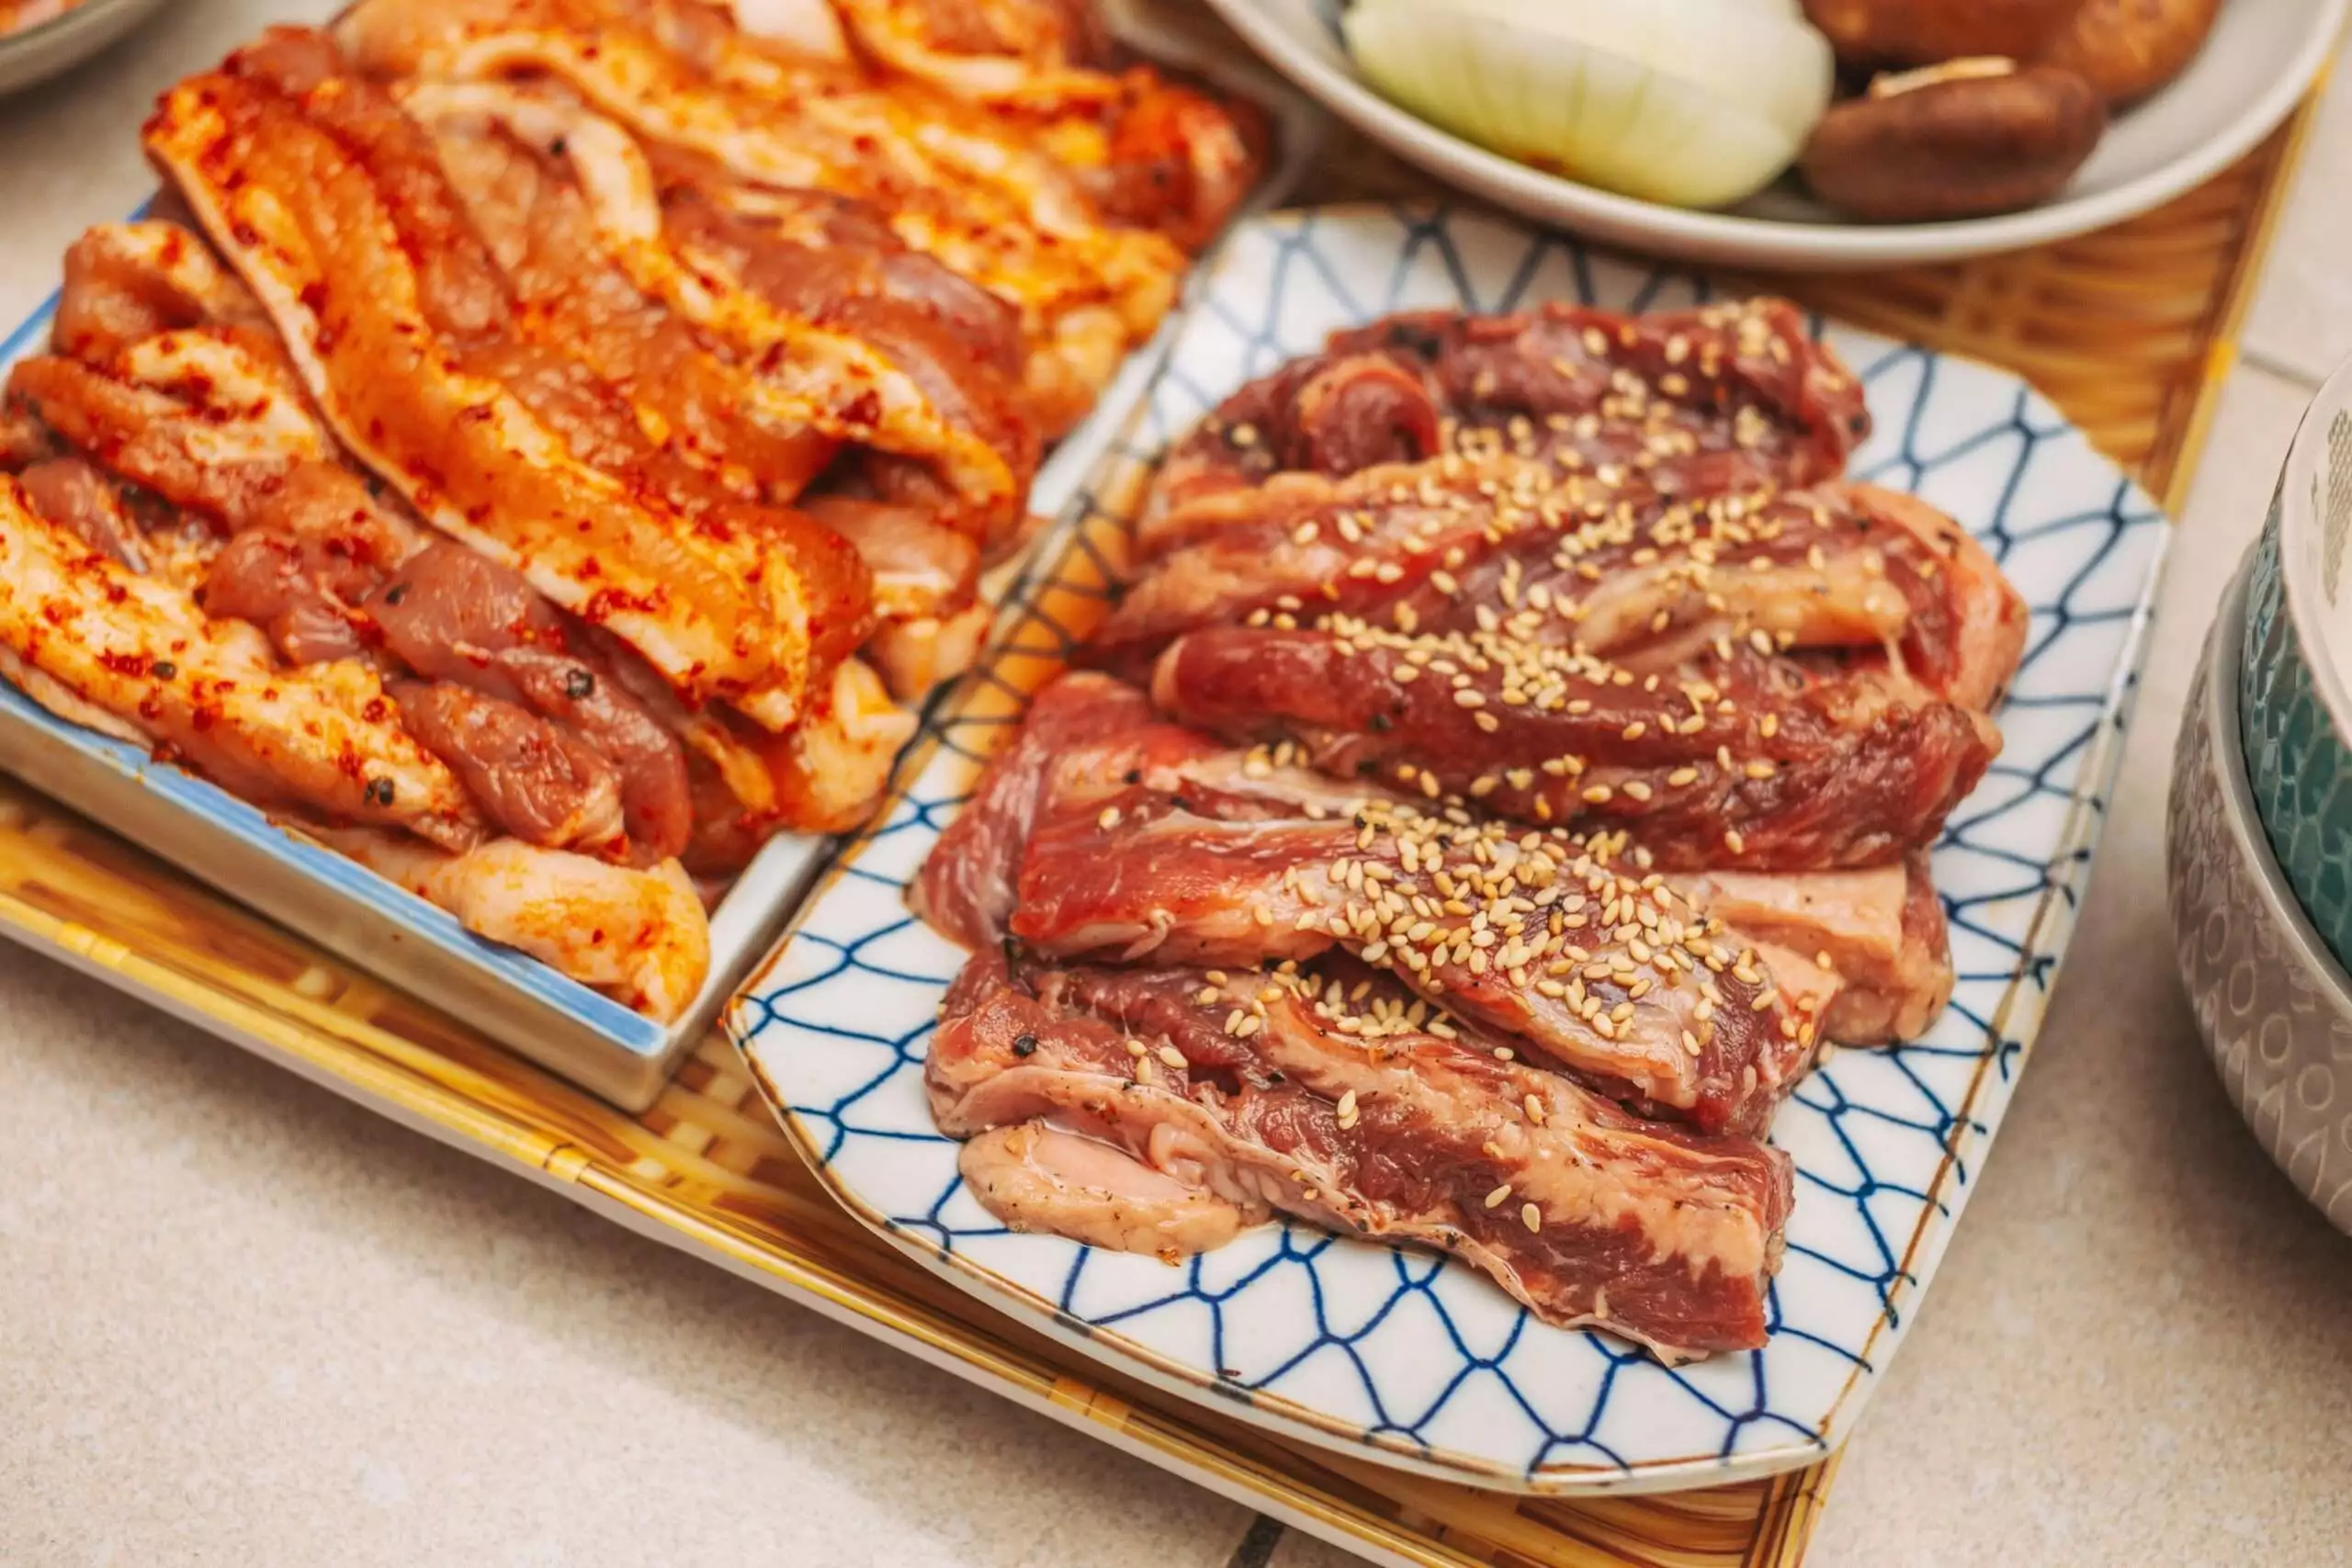 Marinated Barbecue Meats